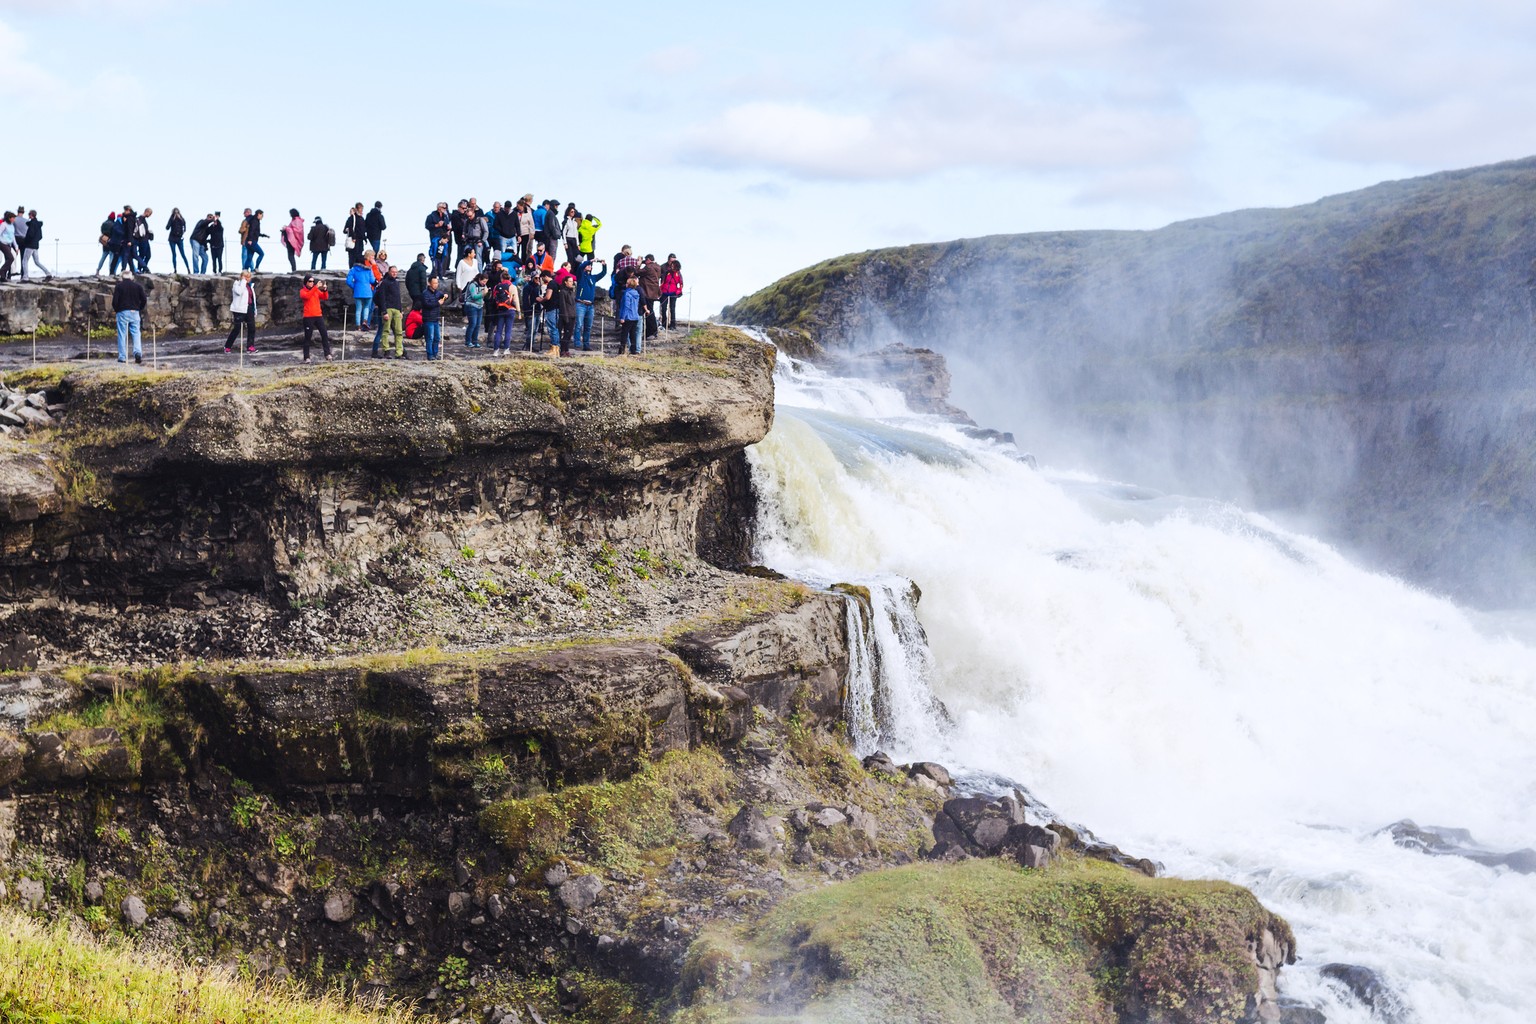 GULLFOSS, ICELAND - SEPTEMBER 6, 2017: people at viewpoint over Gullfoss waterfall. Gullfoss is located in canyon of Olfusa river, it is one of the most popular tourist attractions in Iceland - Bilder